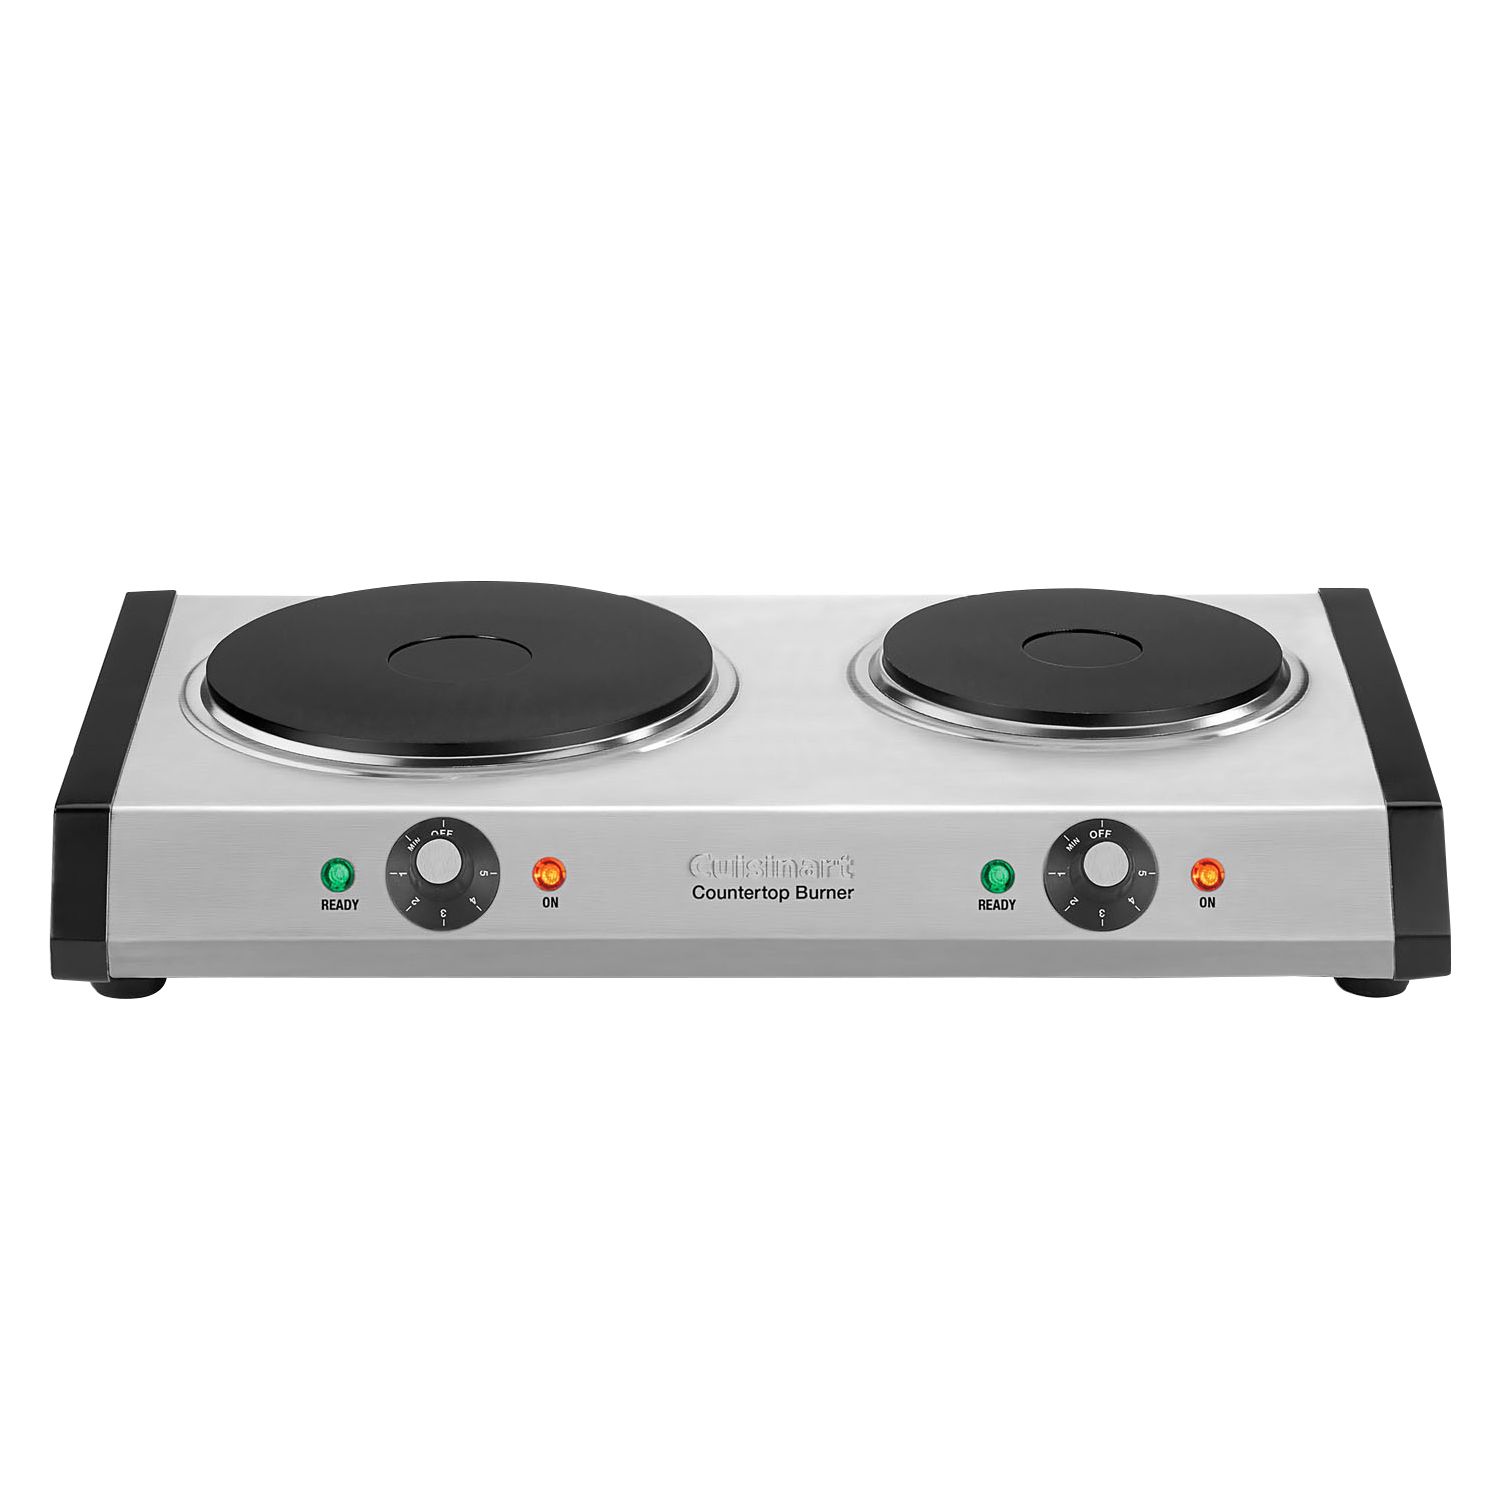 Courant Electric Hotplate Countertop Single Burner, 1000W Portable